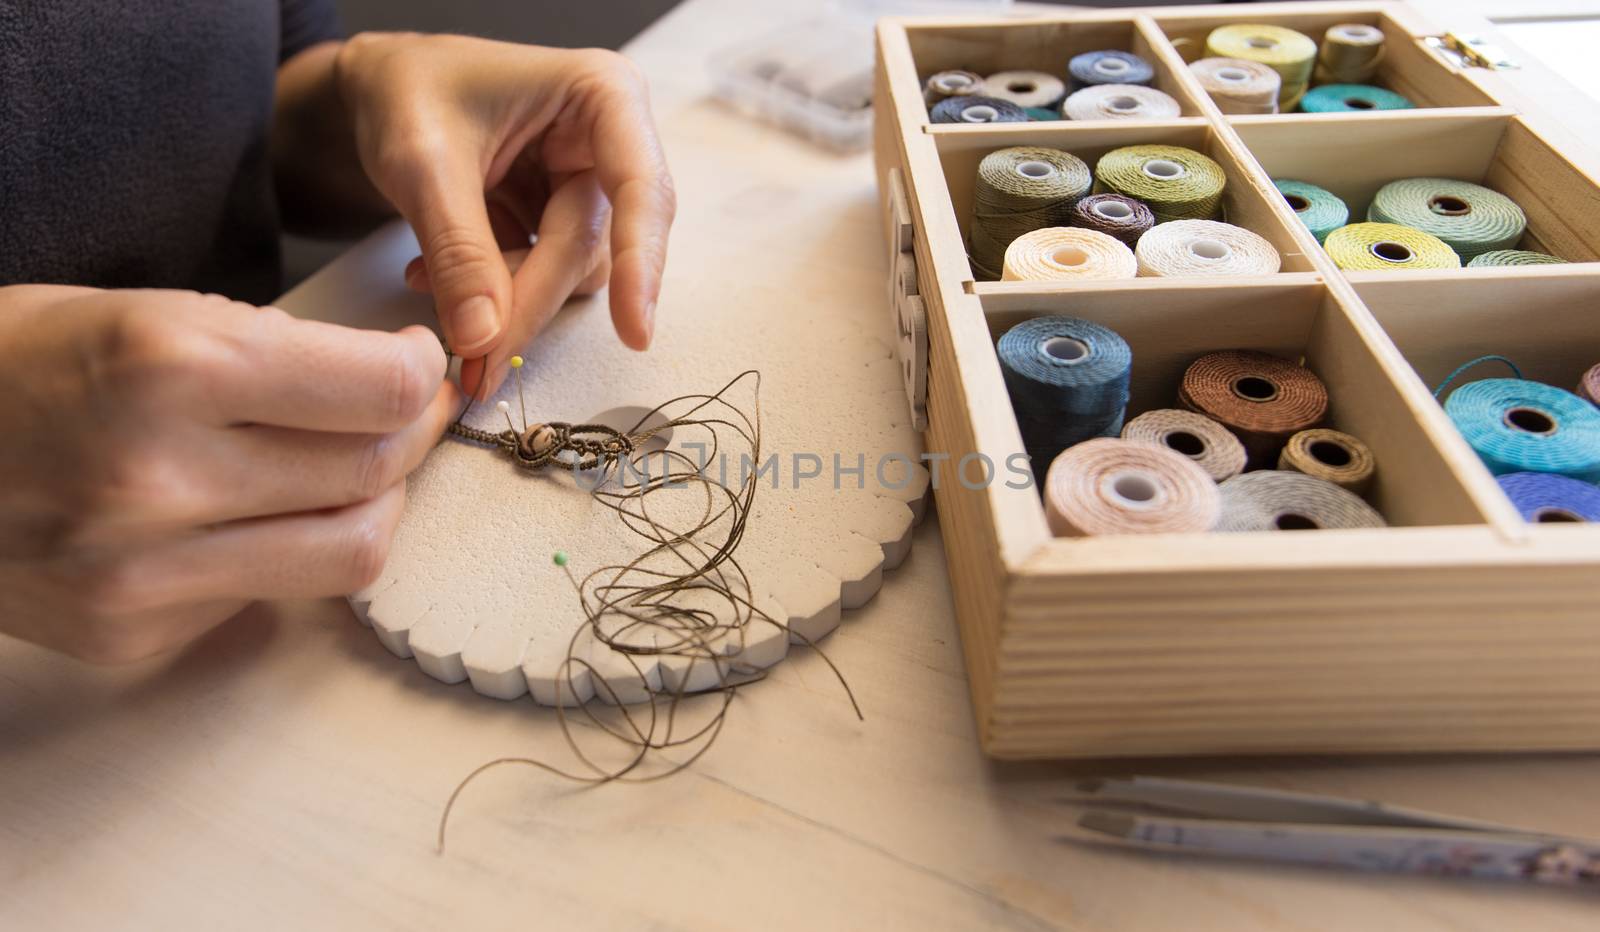 Lifestyle concept, work from home to reinvent your life: close-up of woman hands making macrame knotted jewelry with stone beads and tools on light wooden table